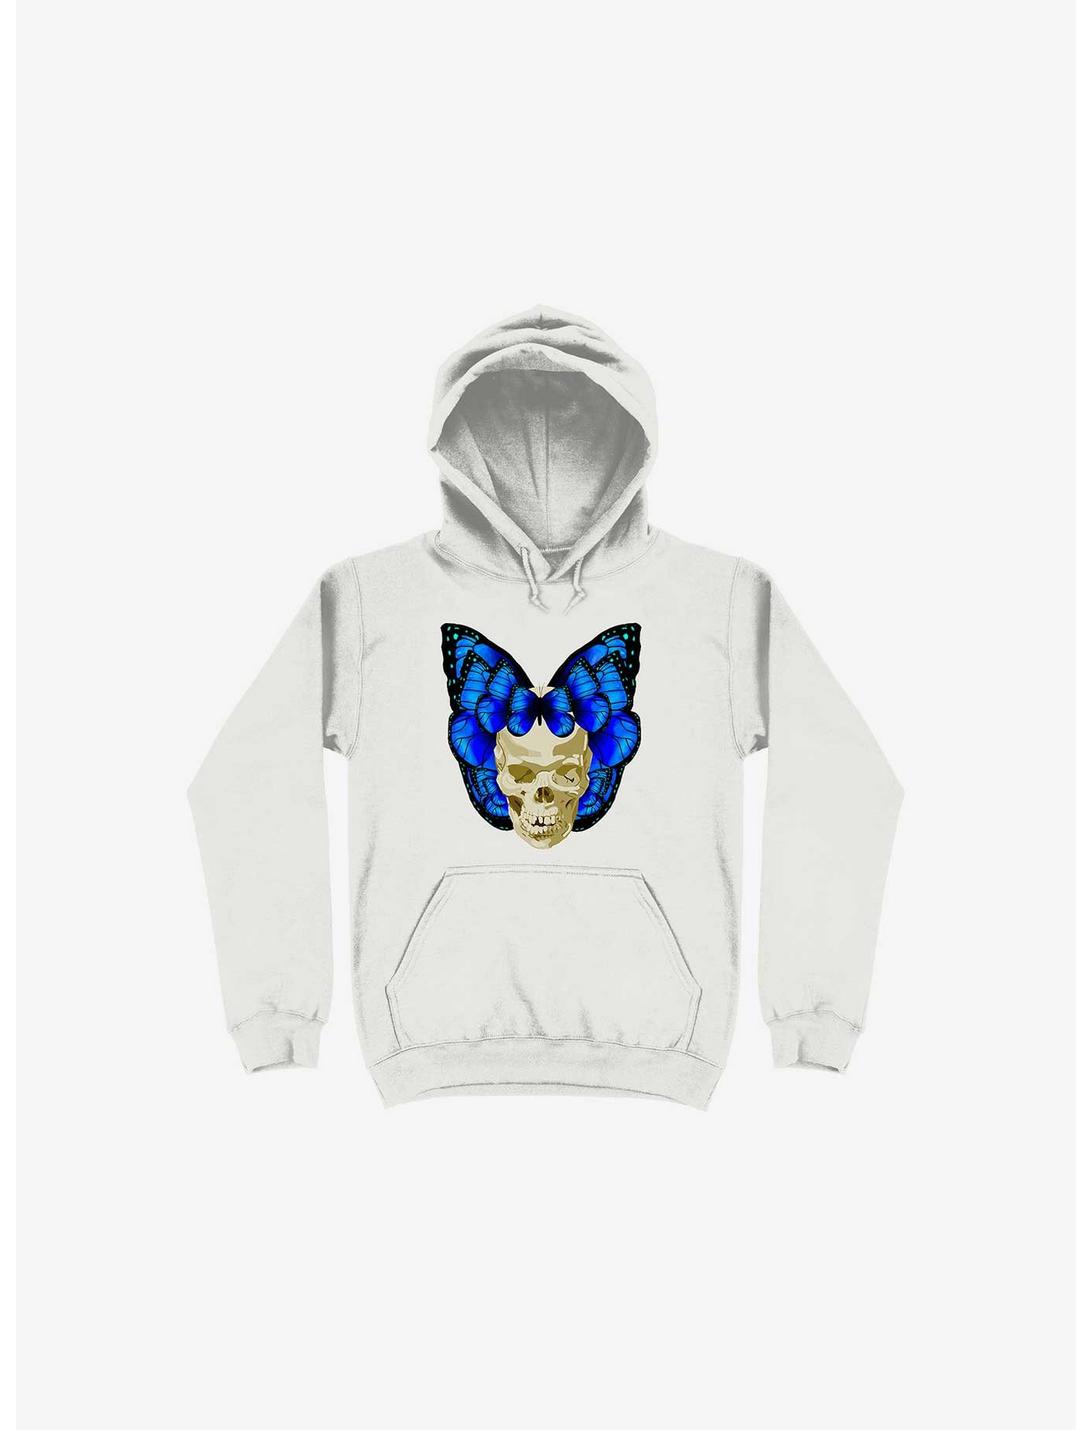 Wings Of Death Butterfly Skull White Hoodie, WHITE, hi-res